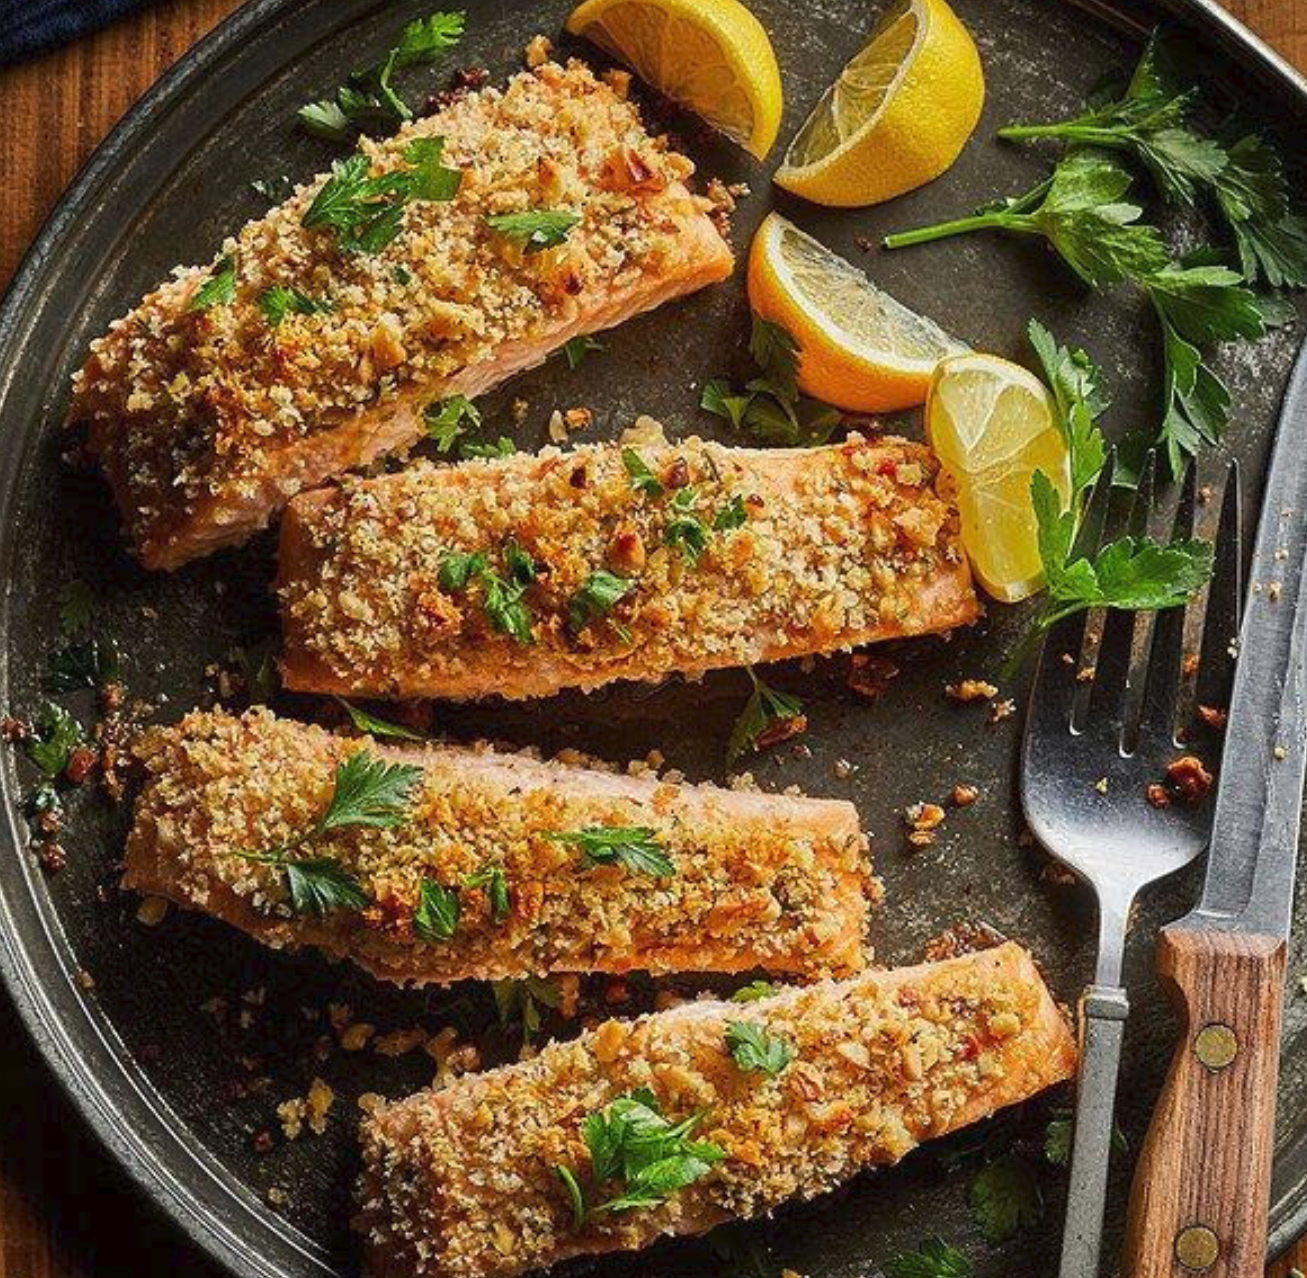 High Protein Meal Ideas - WALNUT-ROSEMARY CRUSTED SALMON